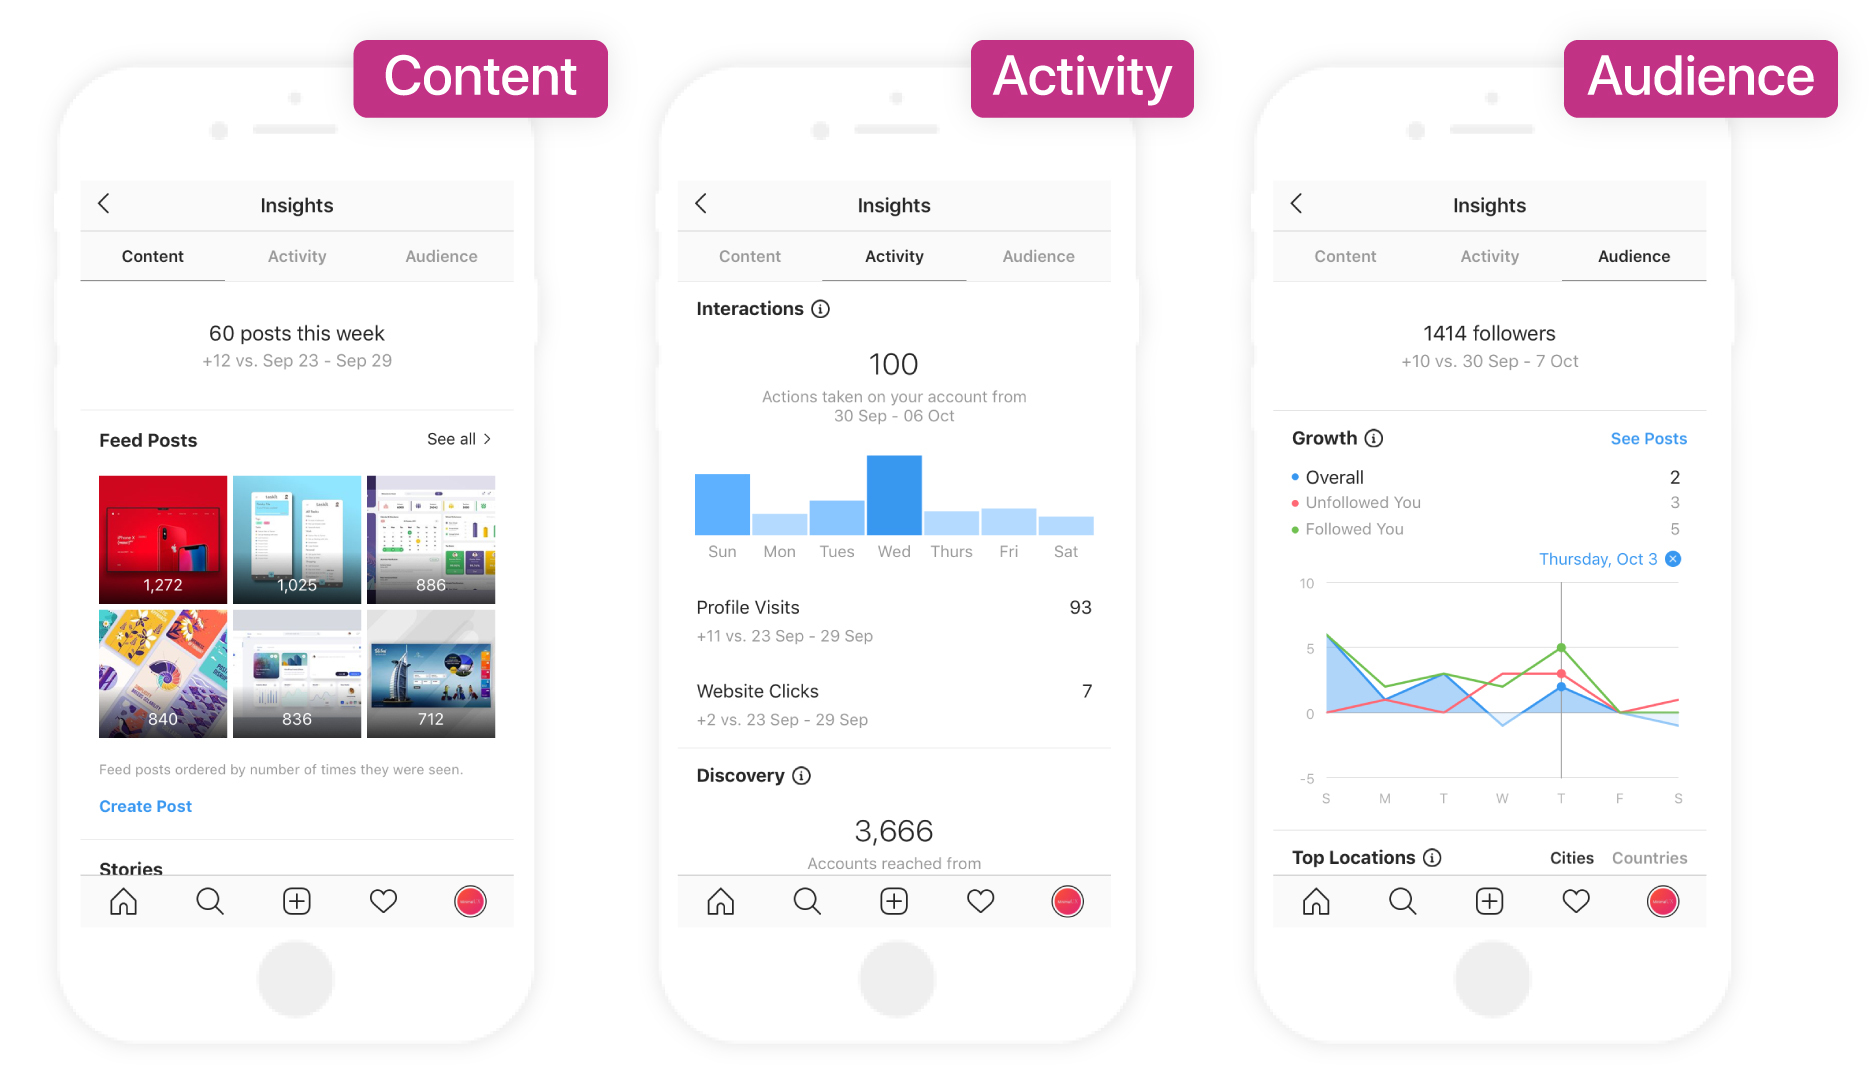 Examples of kinds of insights you can see in instagram